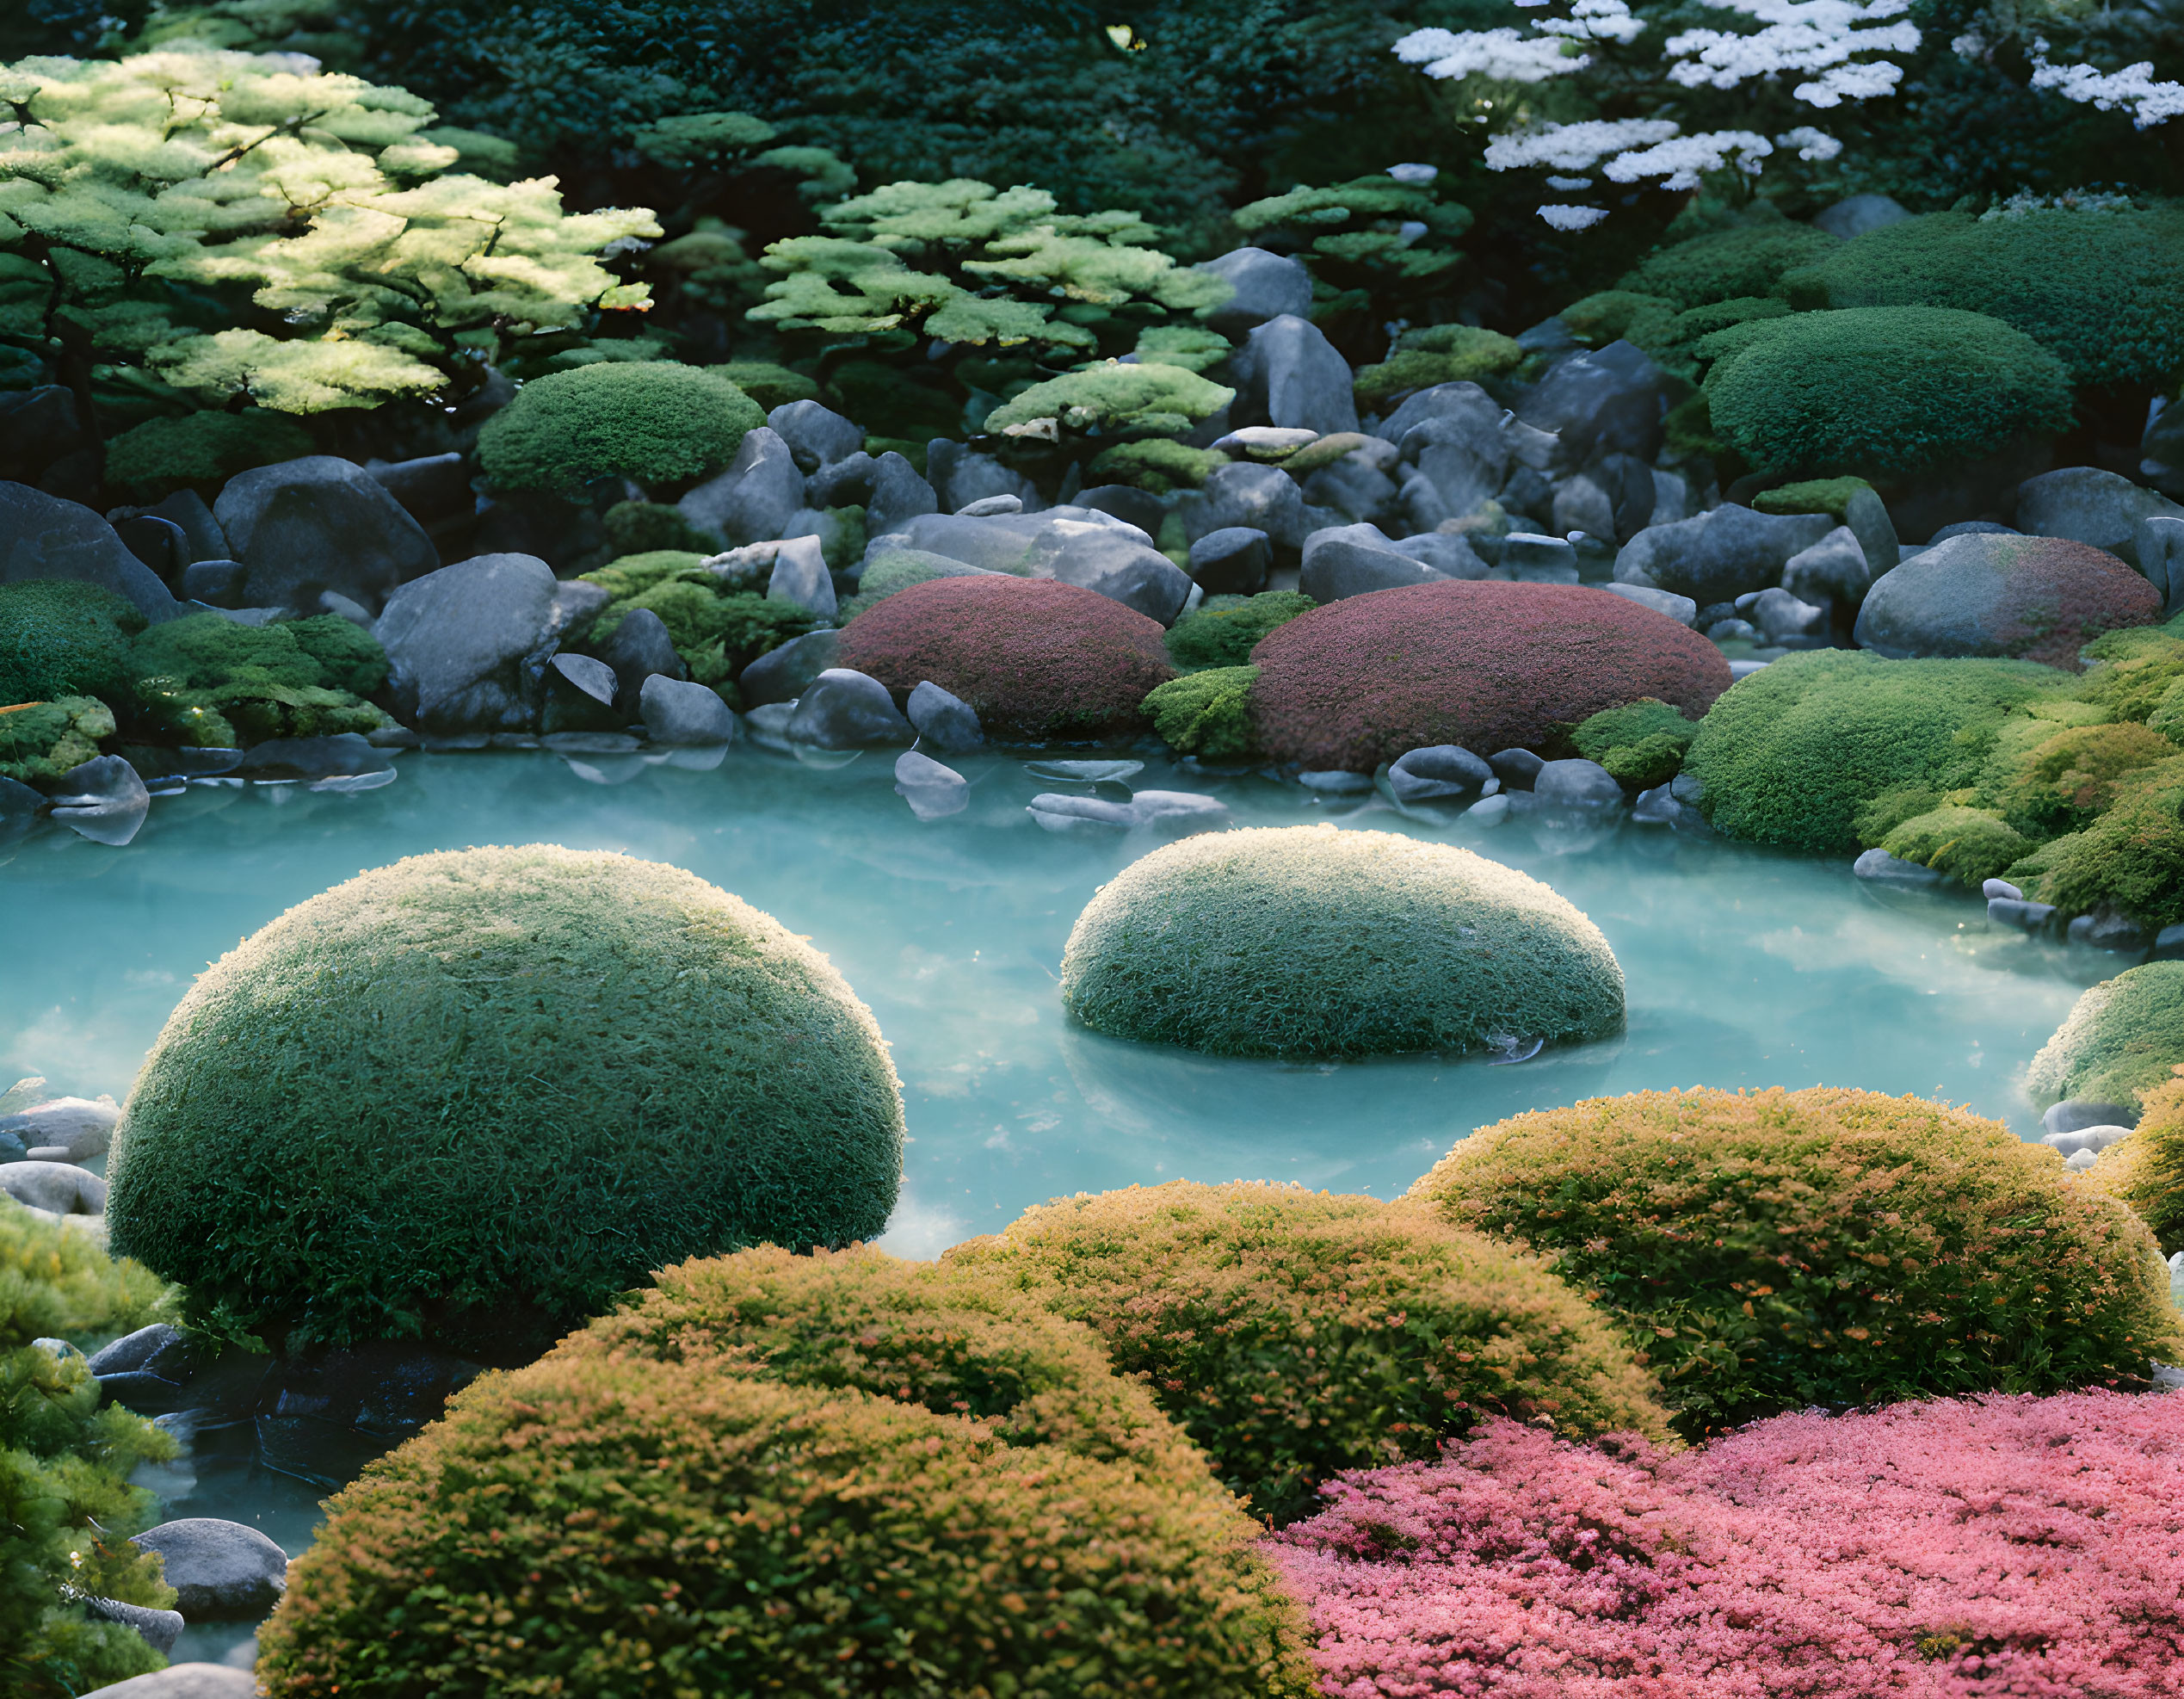 Tranquil Japanese Garden with Moss-Covered Rocks and Vibrant Foliage